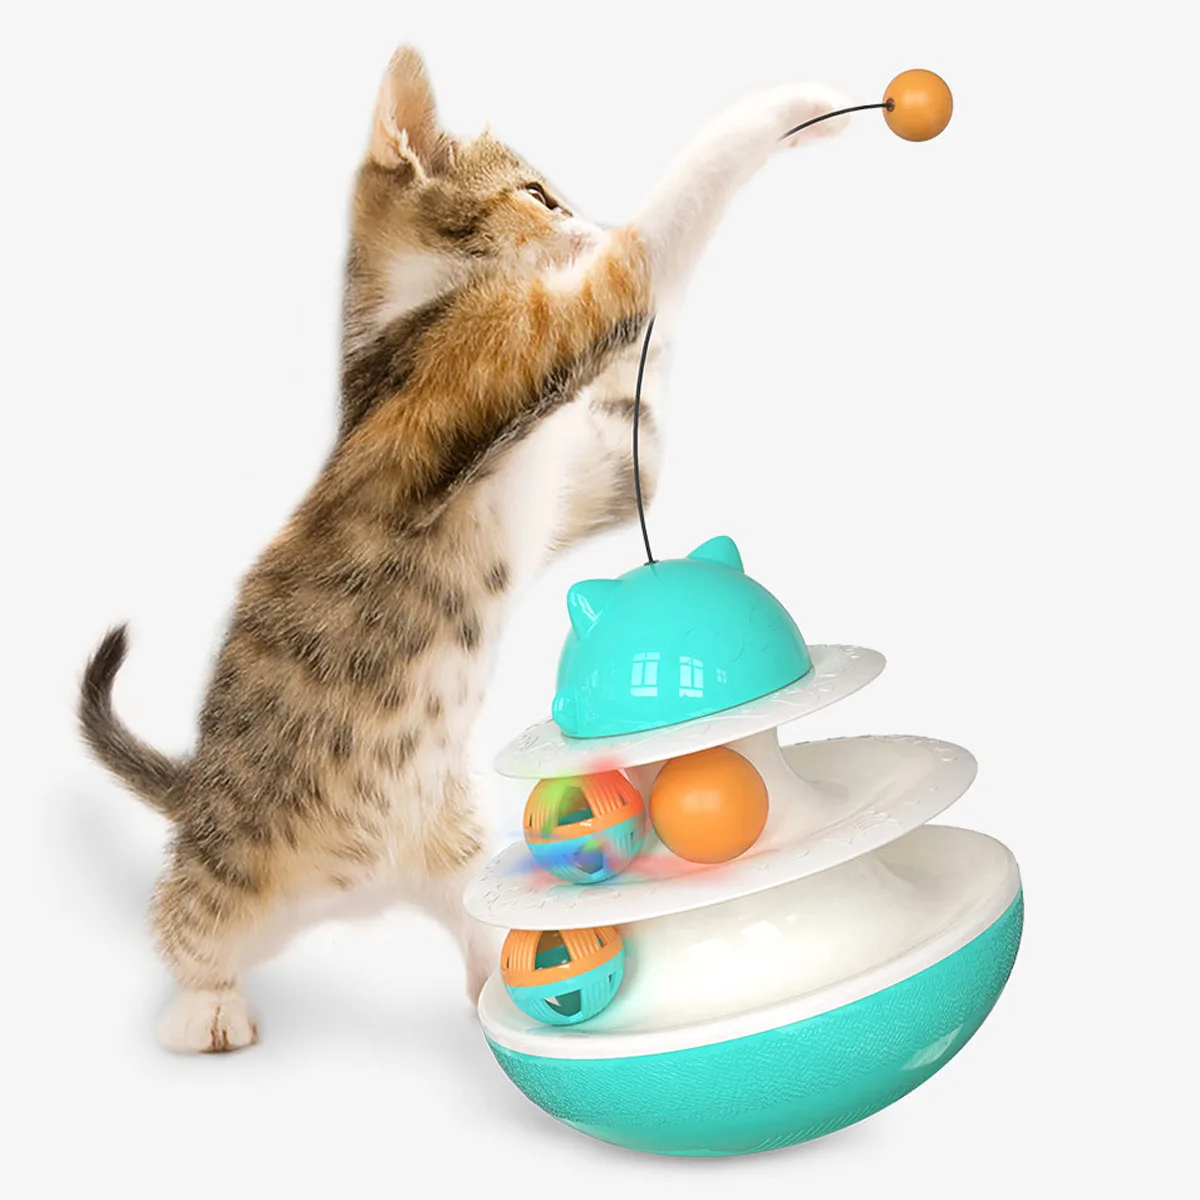 

Interactive Toys For A Cat Tumbler Crazy Toys For Cats Funny Cats Accessories Tunnel Cat Toys Cat Mint Teaser For Kittens Puppy